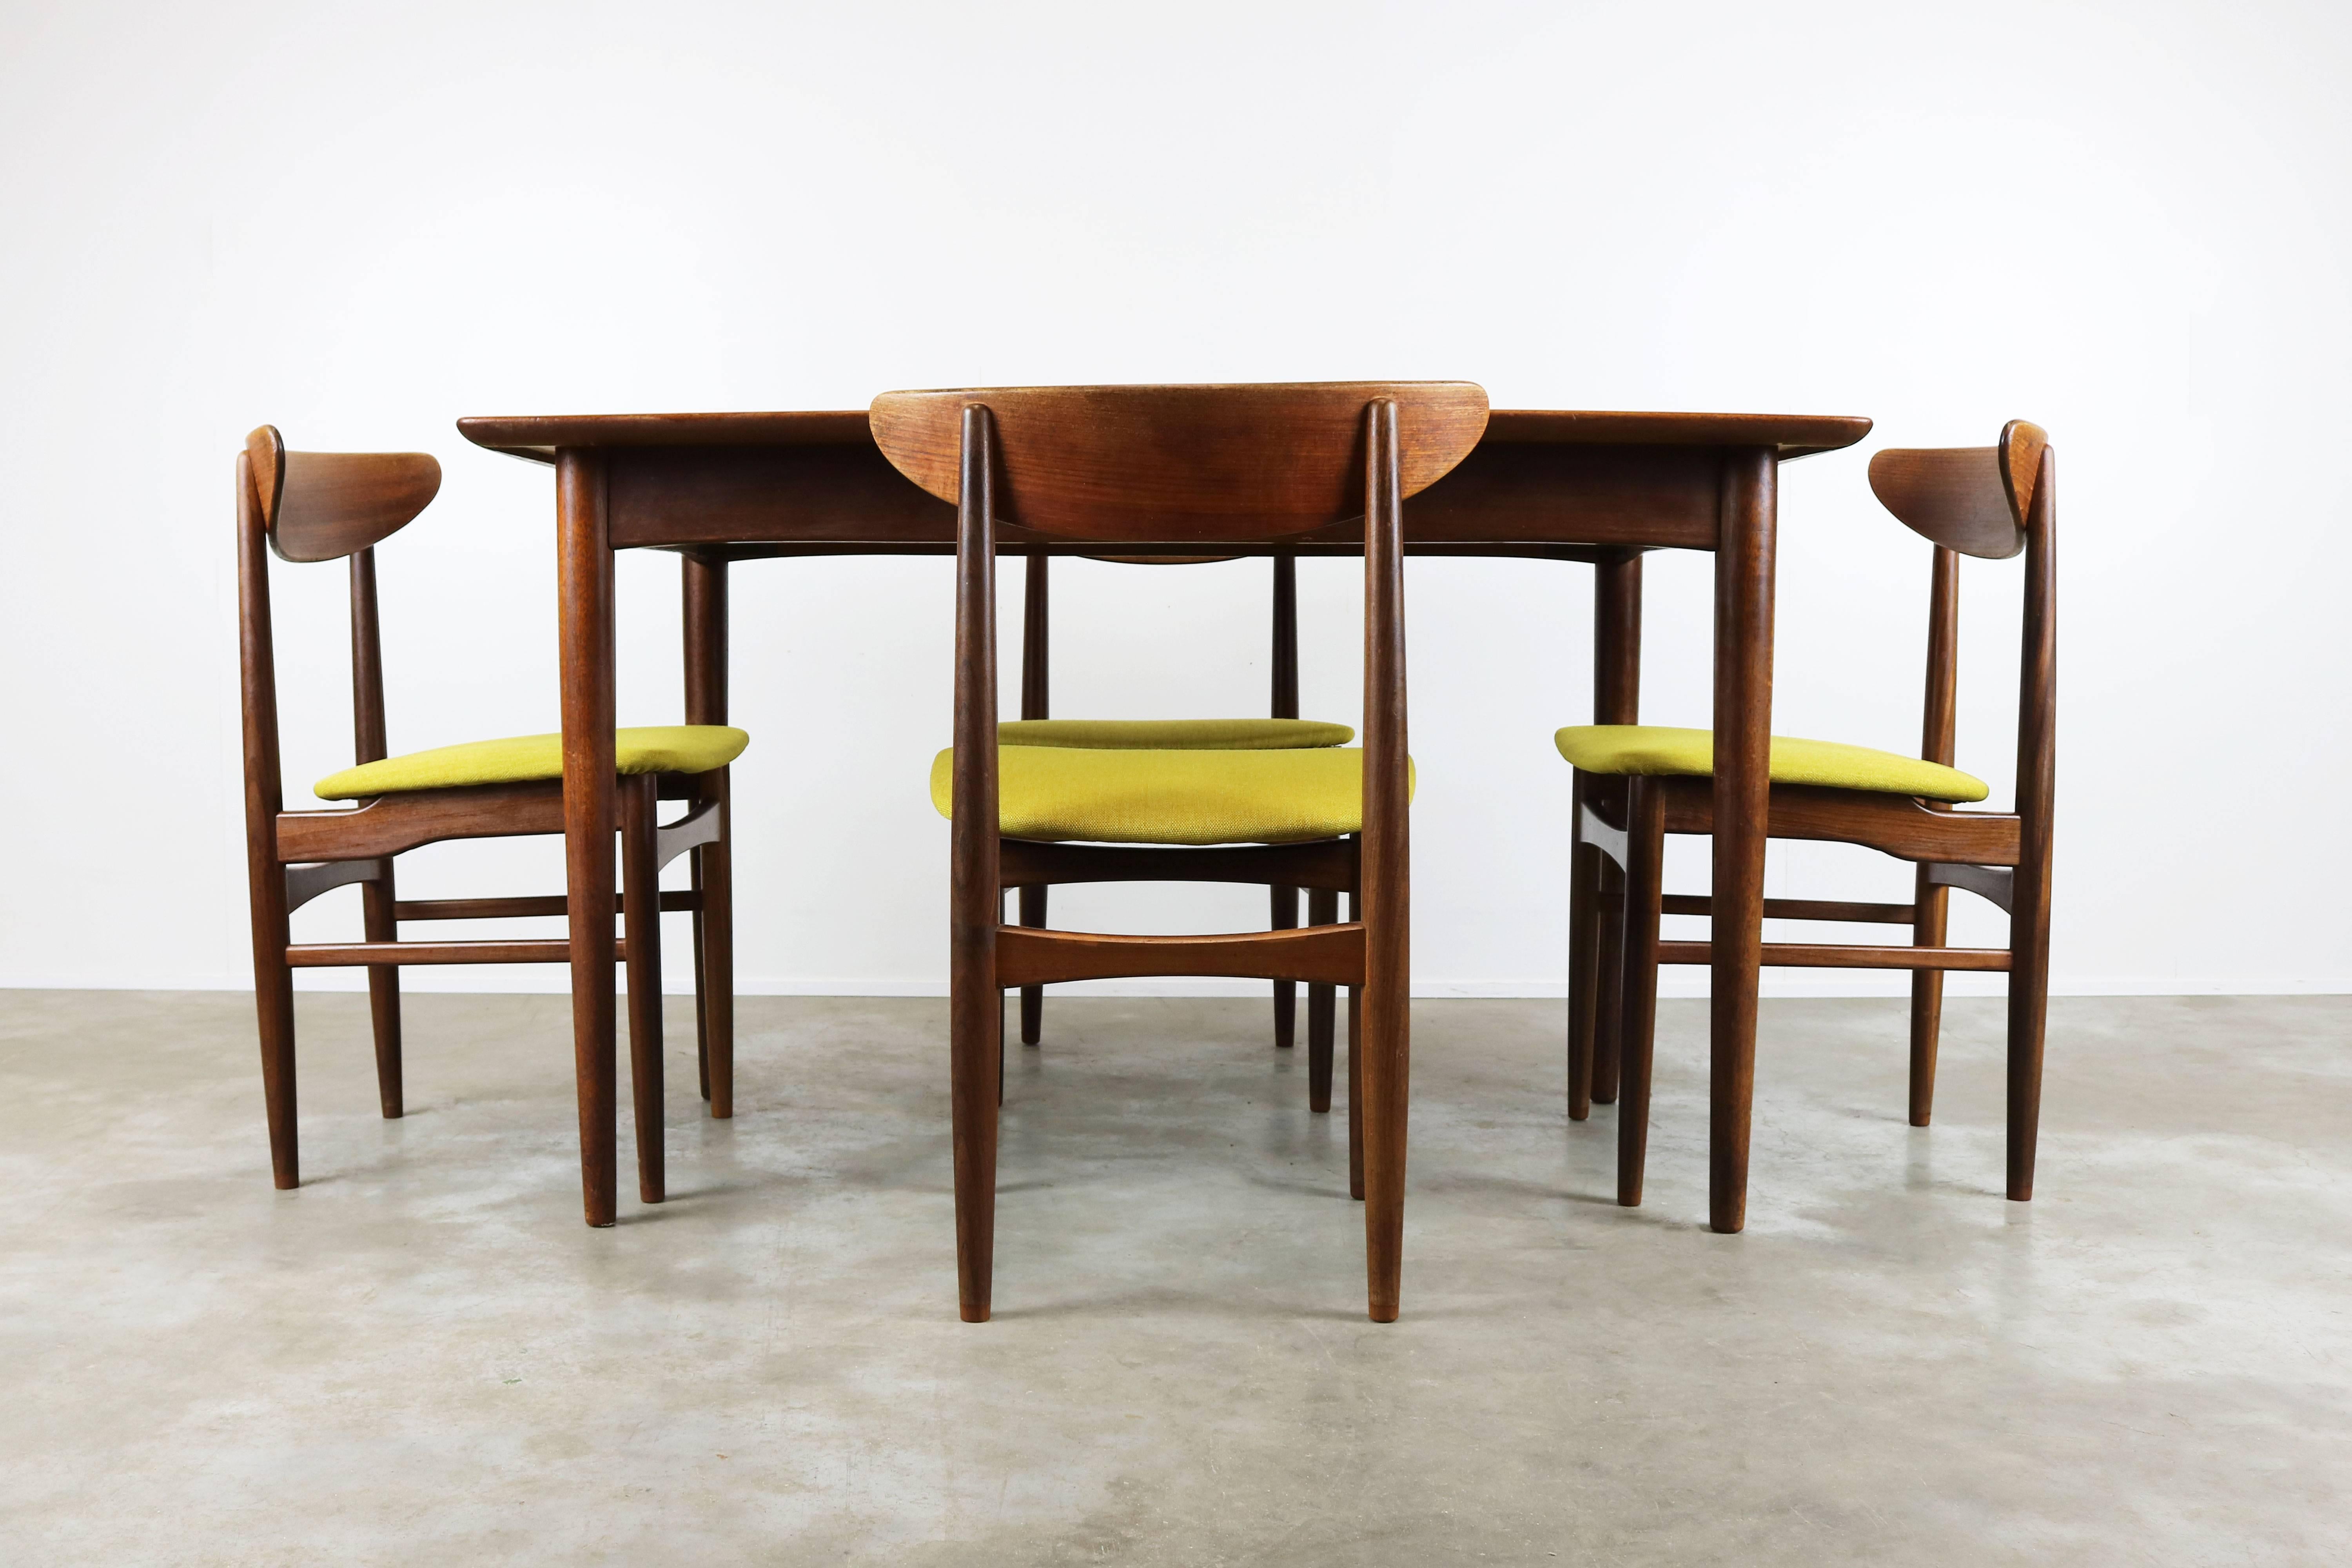 Wonderful Danish design dining room set designed and produced by Dyrlund in the 1950s. The set has four sculpted solid teak dining chairs and a extendable teak dining table. Dyrlund is known for their high quality and high craftsmanship furniture